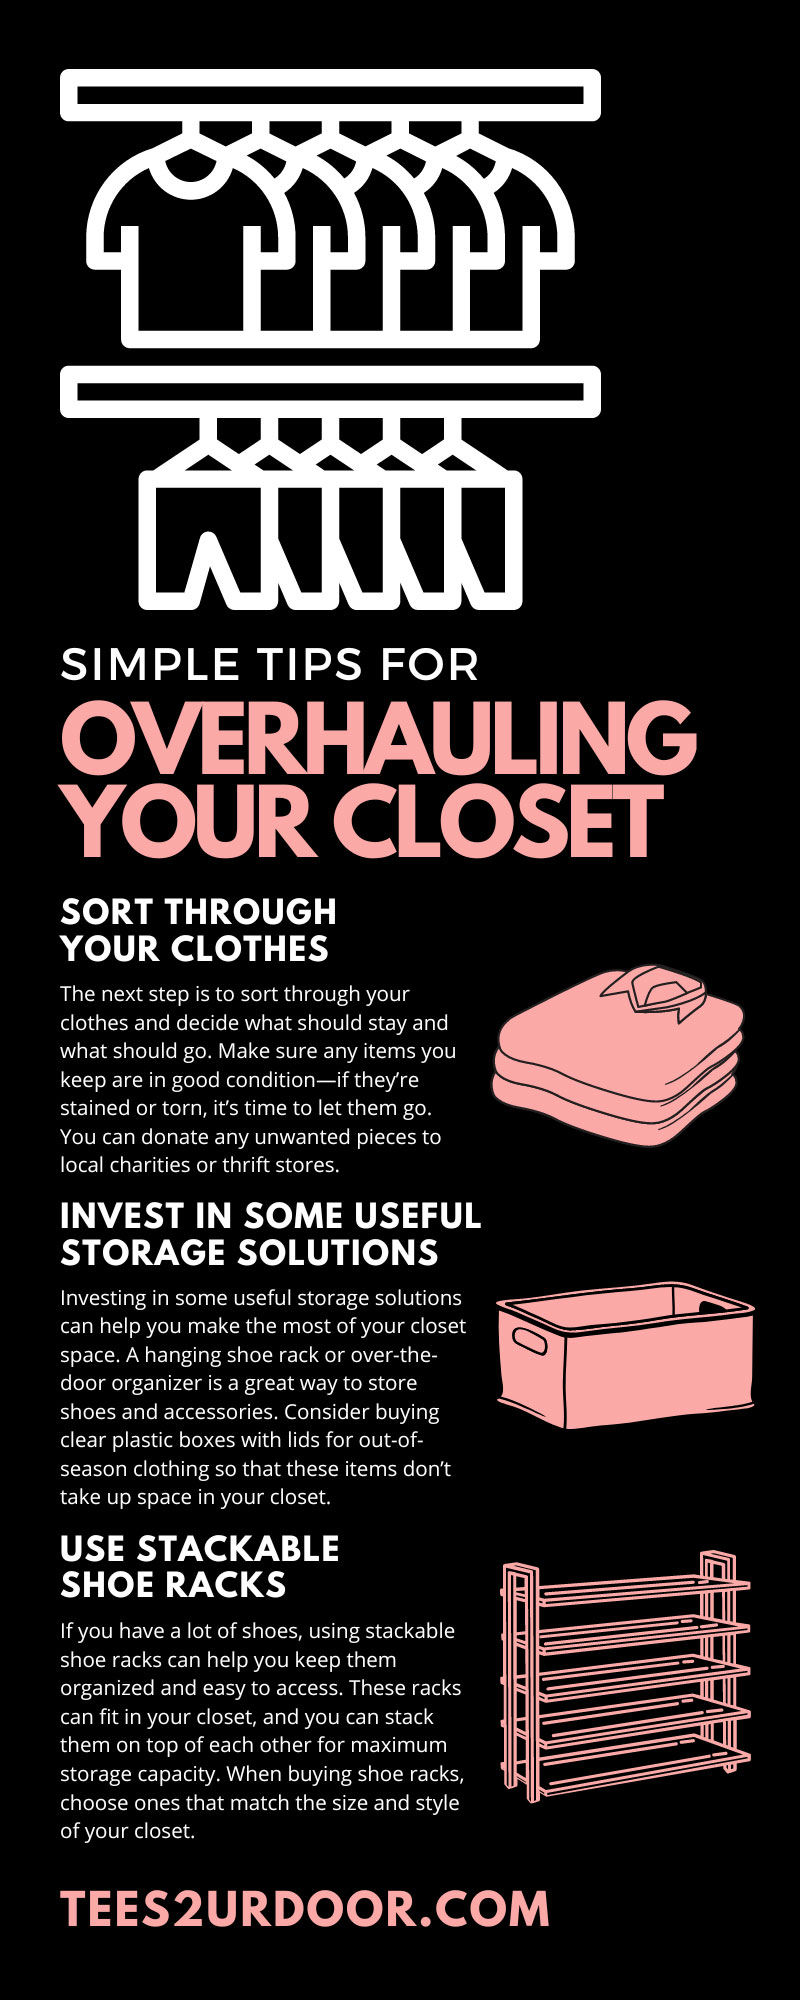 9 Simple Tips for Overhauling Your Closet